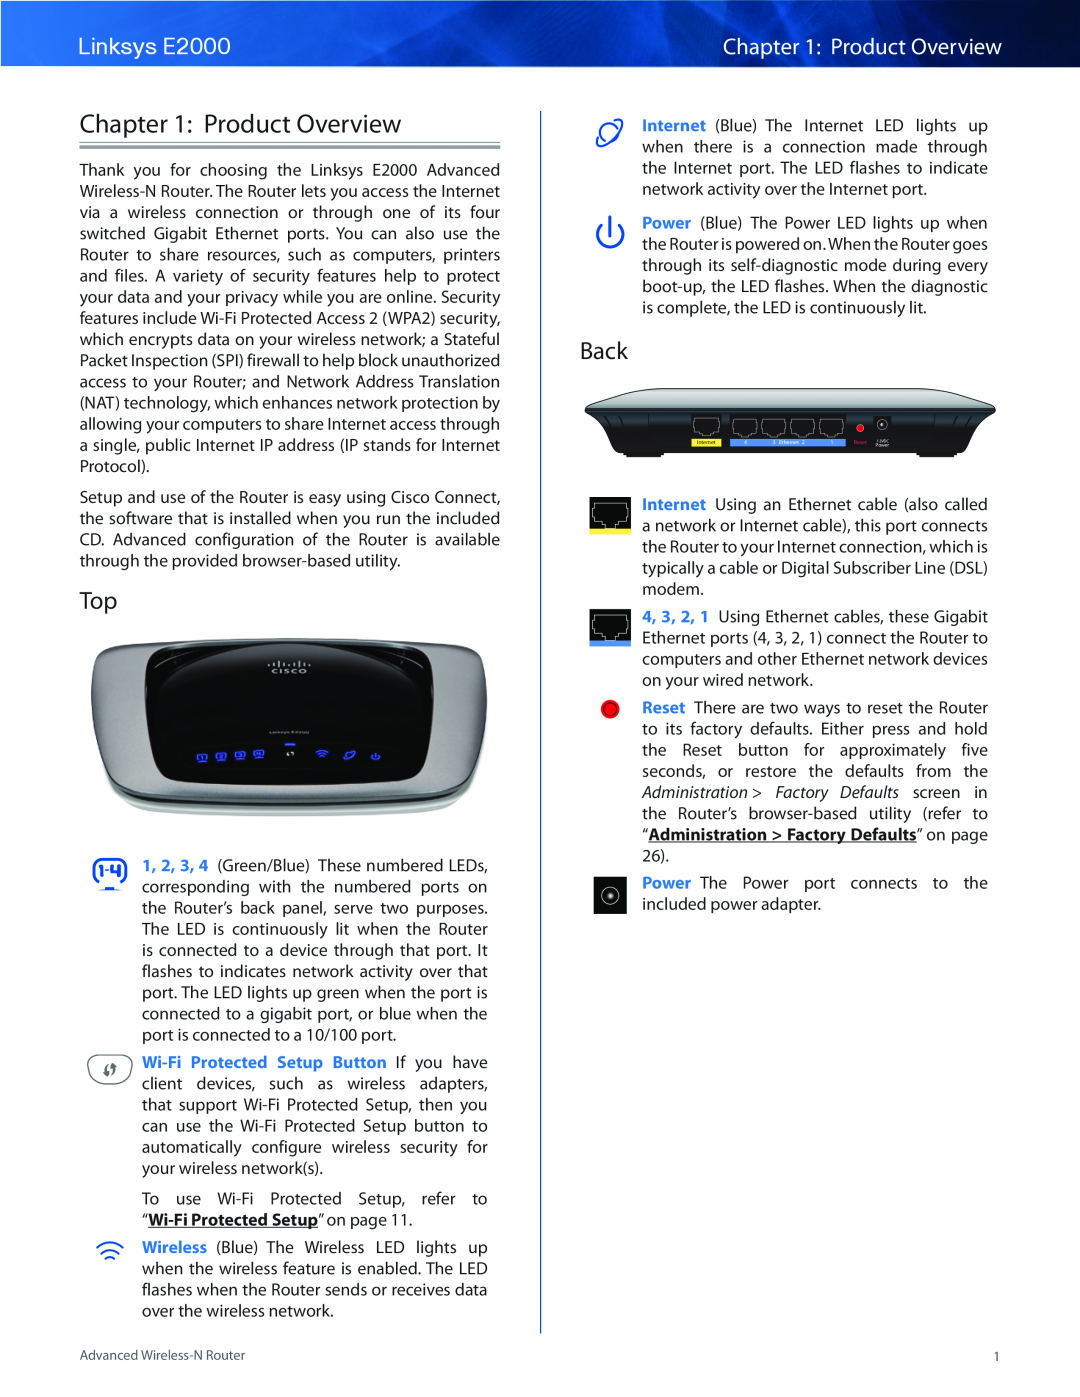 Cisco Systems manual Product Overview, Back, Linksys E2000 